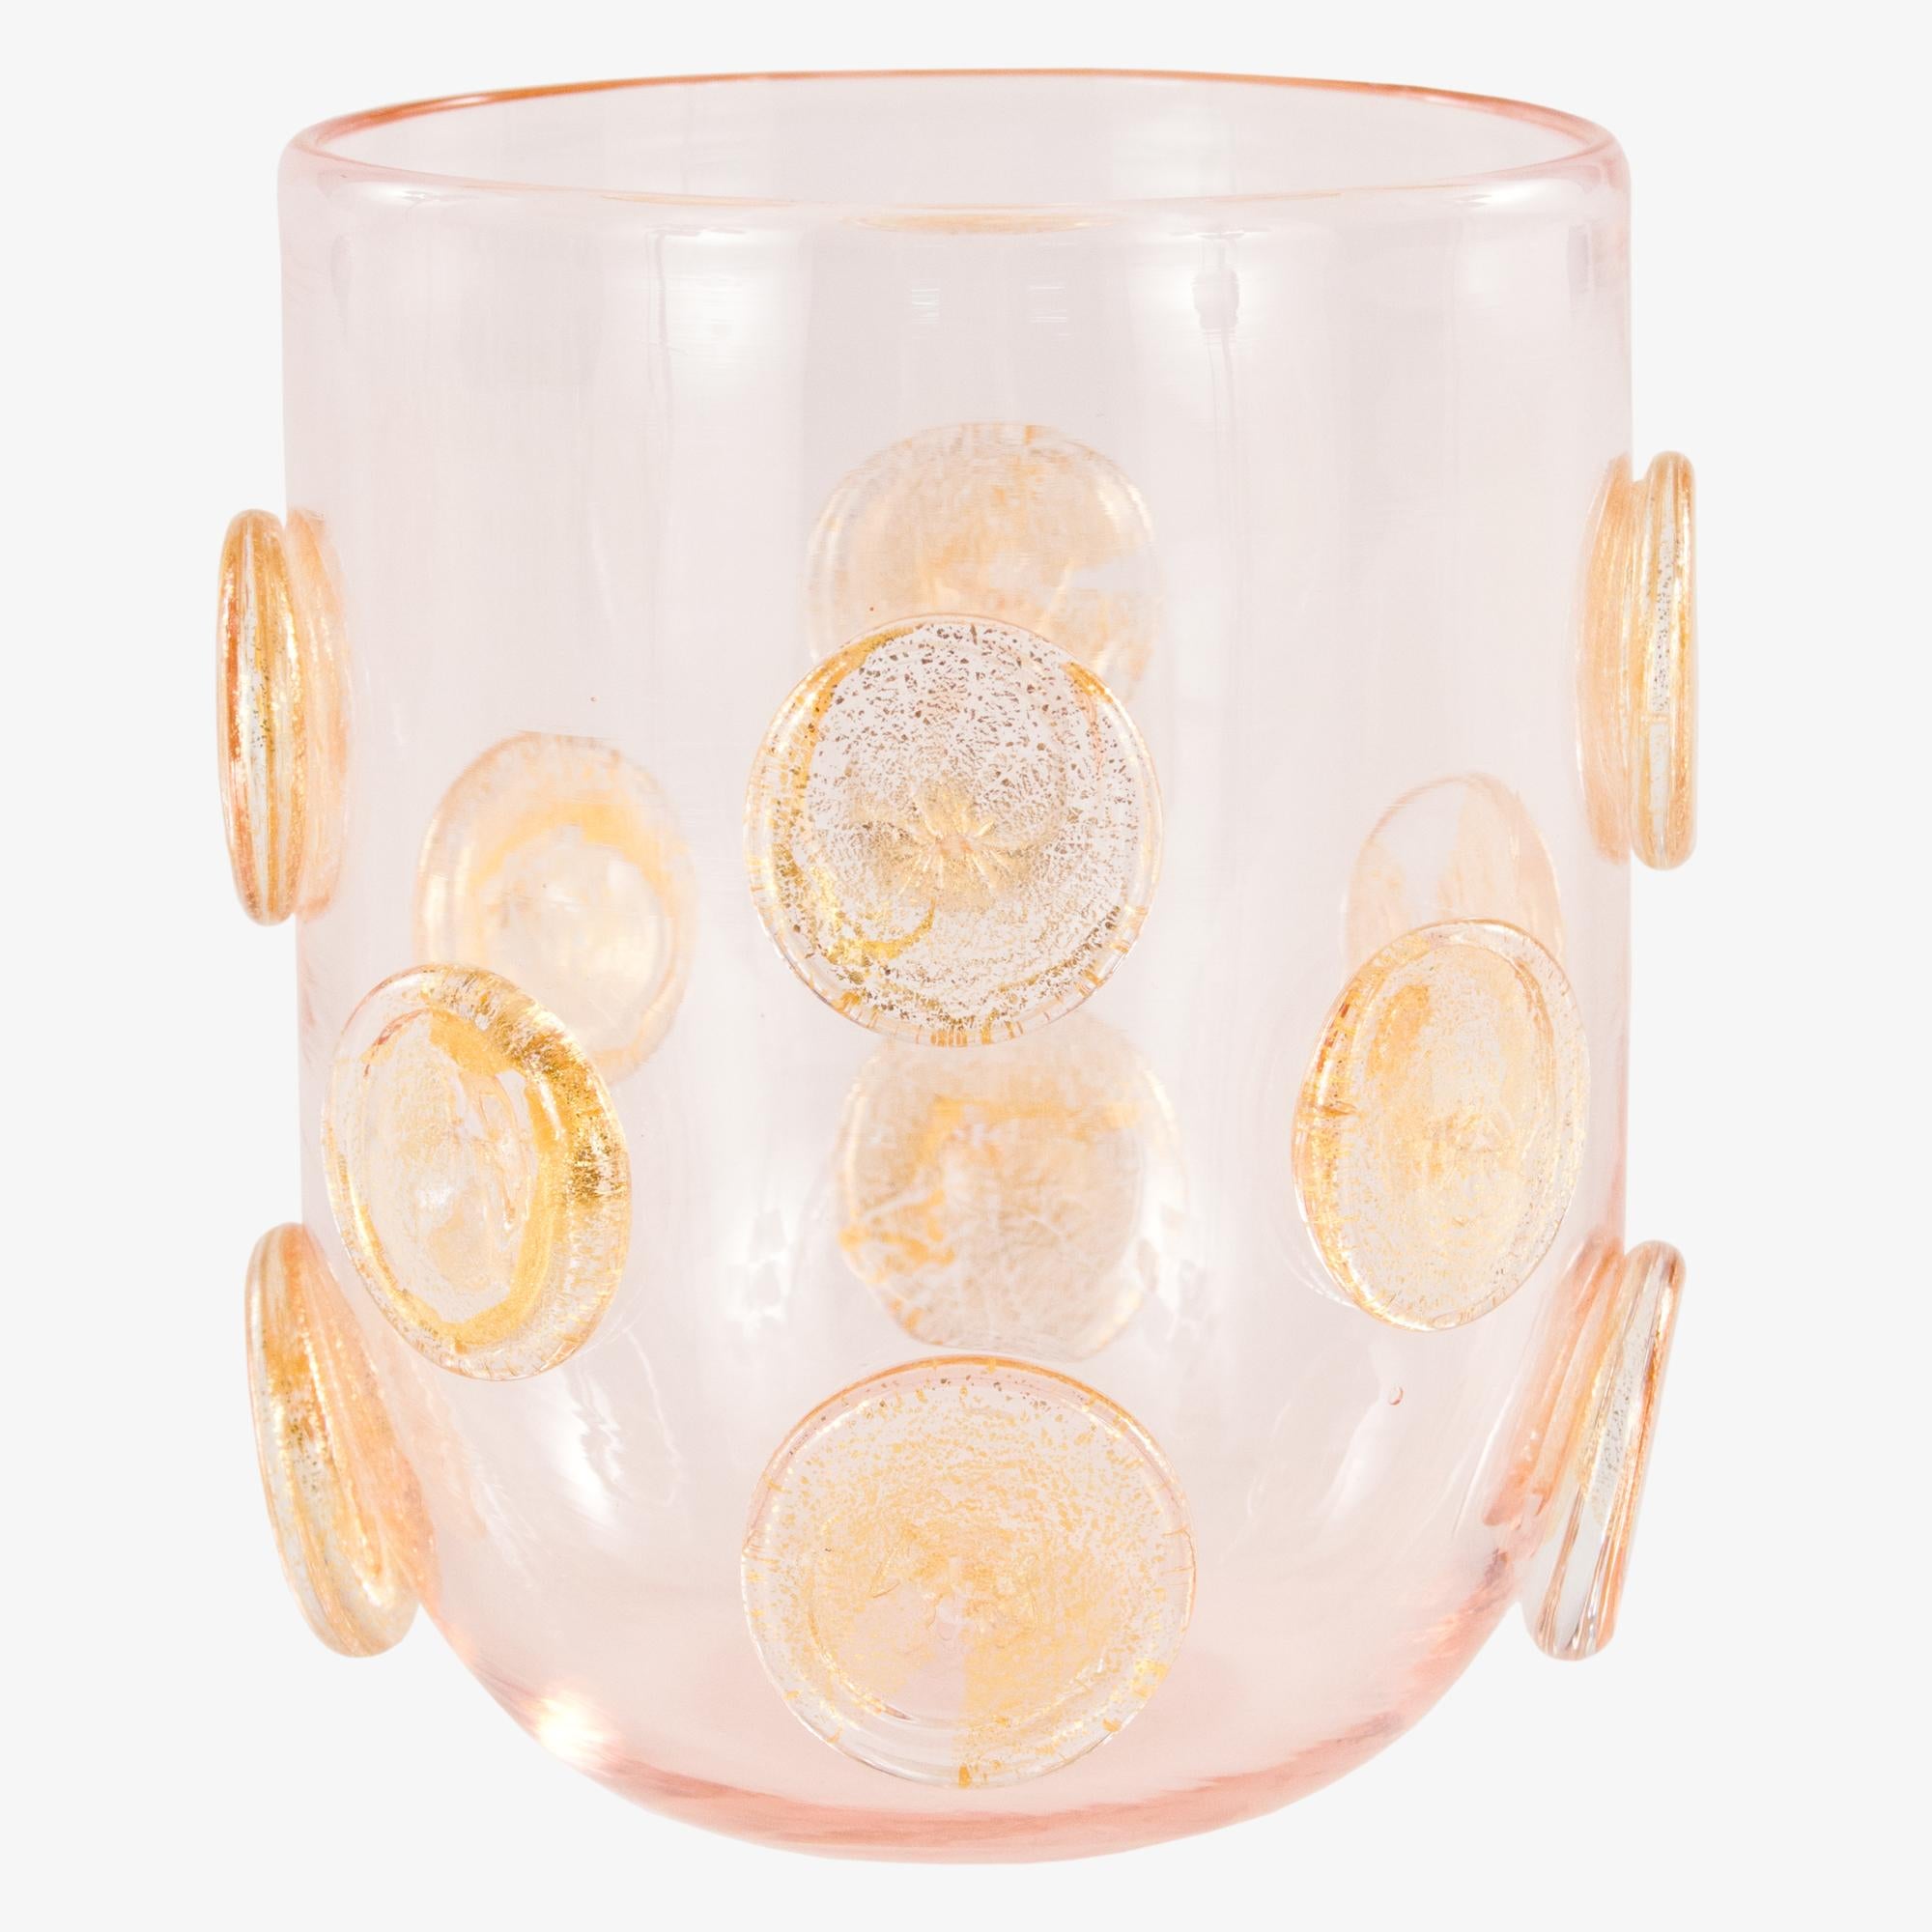 These artistic glasses are handmade by the master artisan in rose color with golden leaf round applications.
Every piece differs one from the other.
The handcrafted soul of our lighting products is reinvented every time we start a new project, when